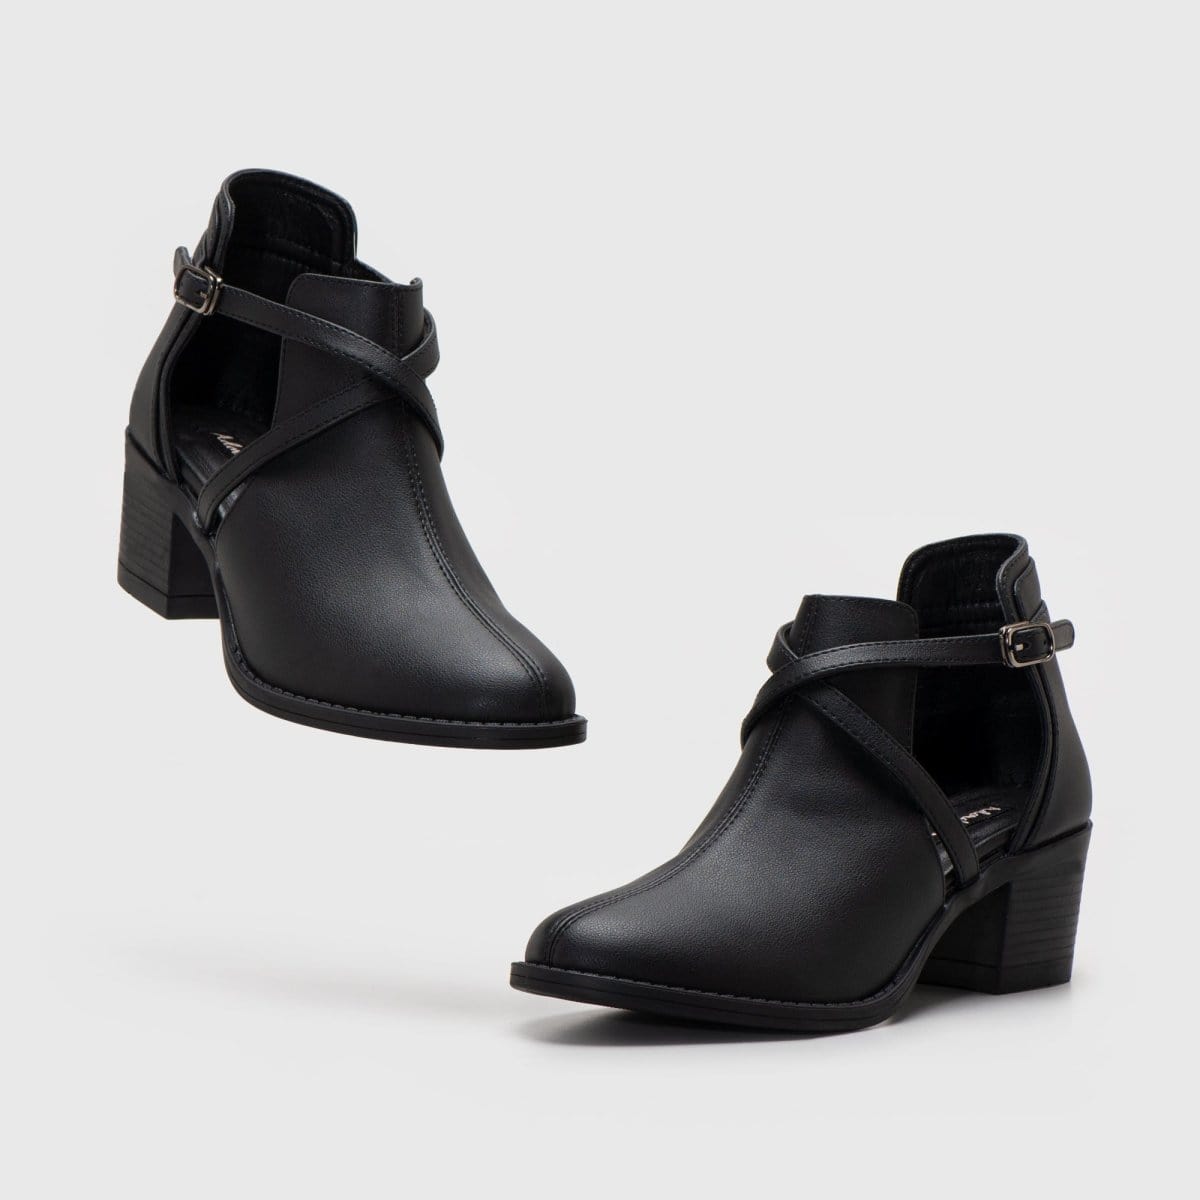 Adorable Projects Official Boots Nauka Boots Black